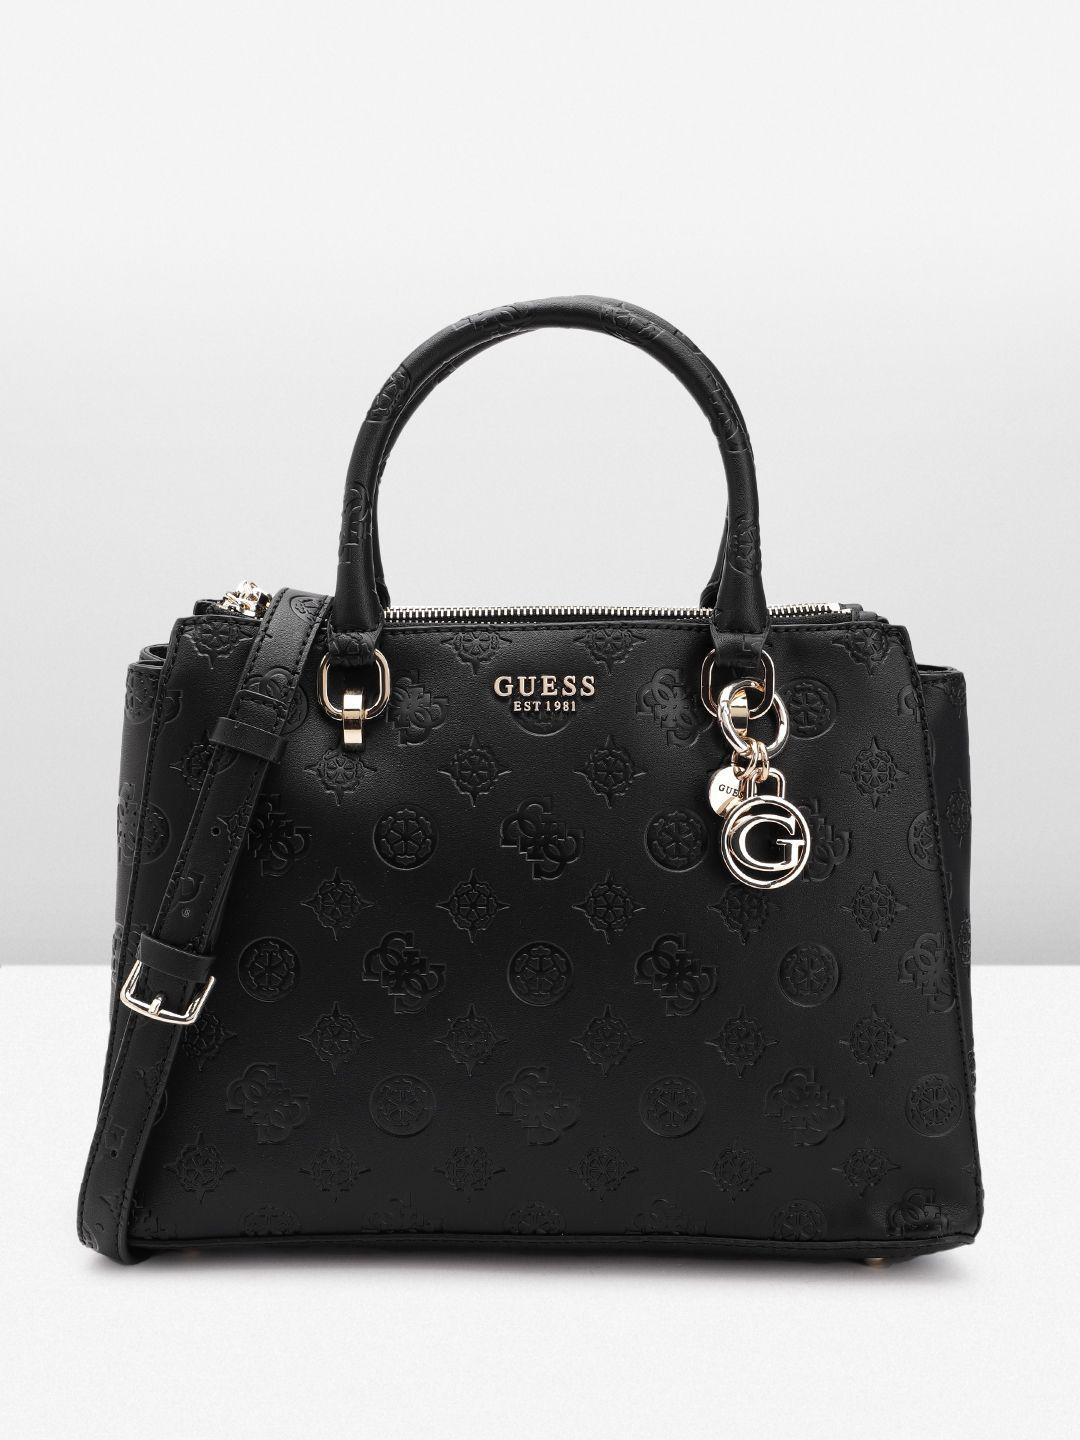 guess brand logo textured structured handheld bag